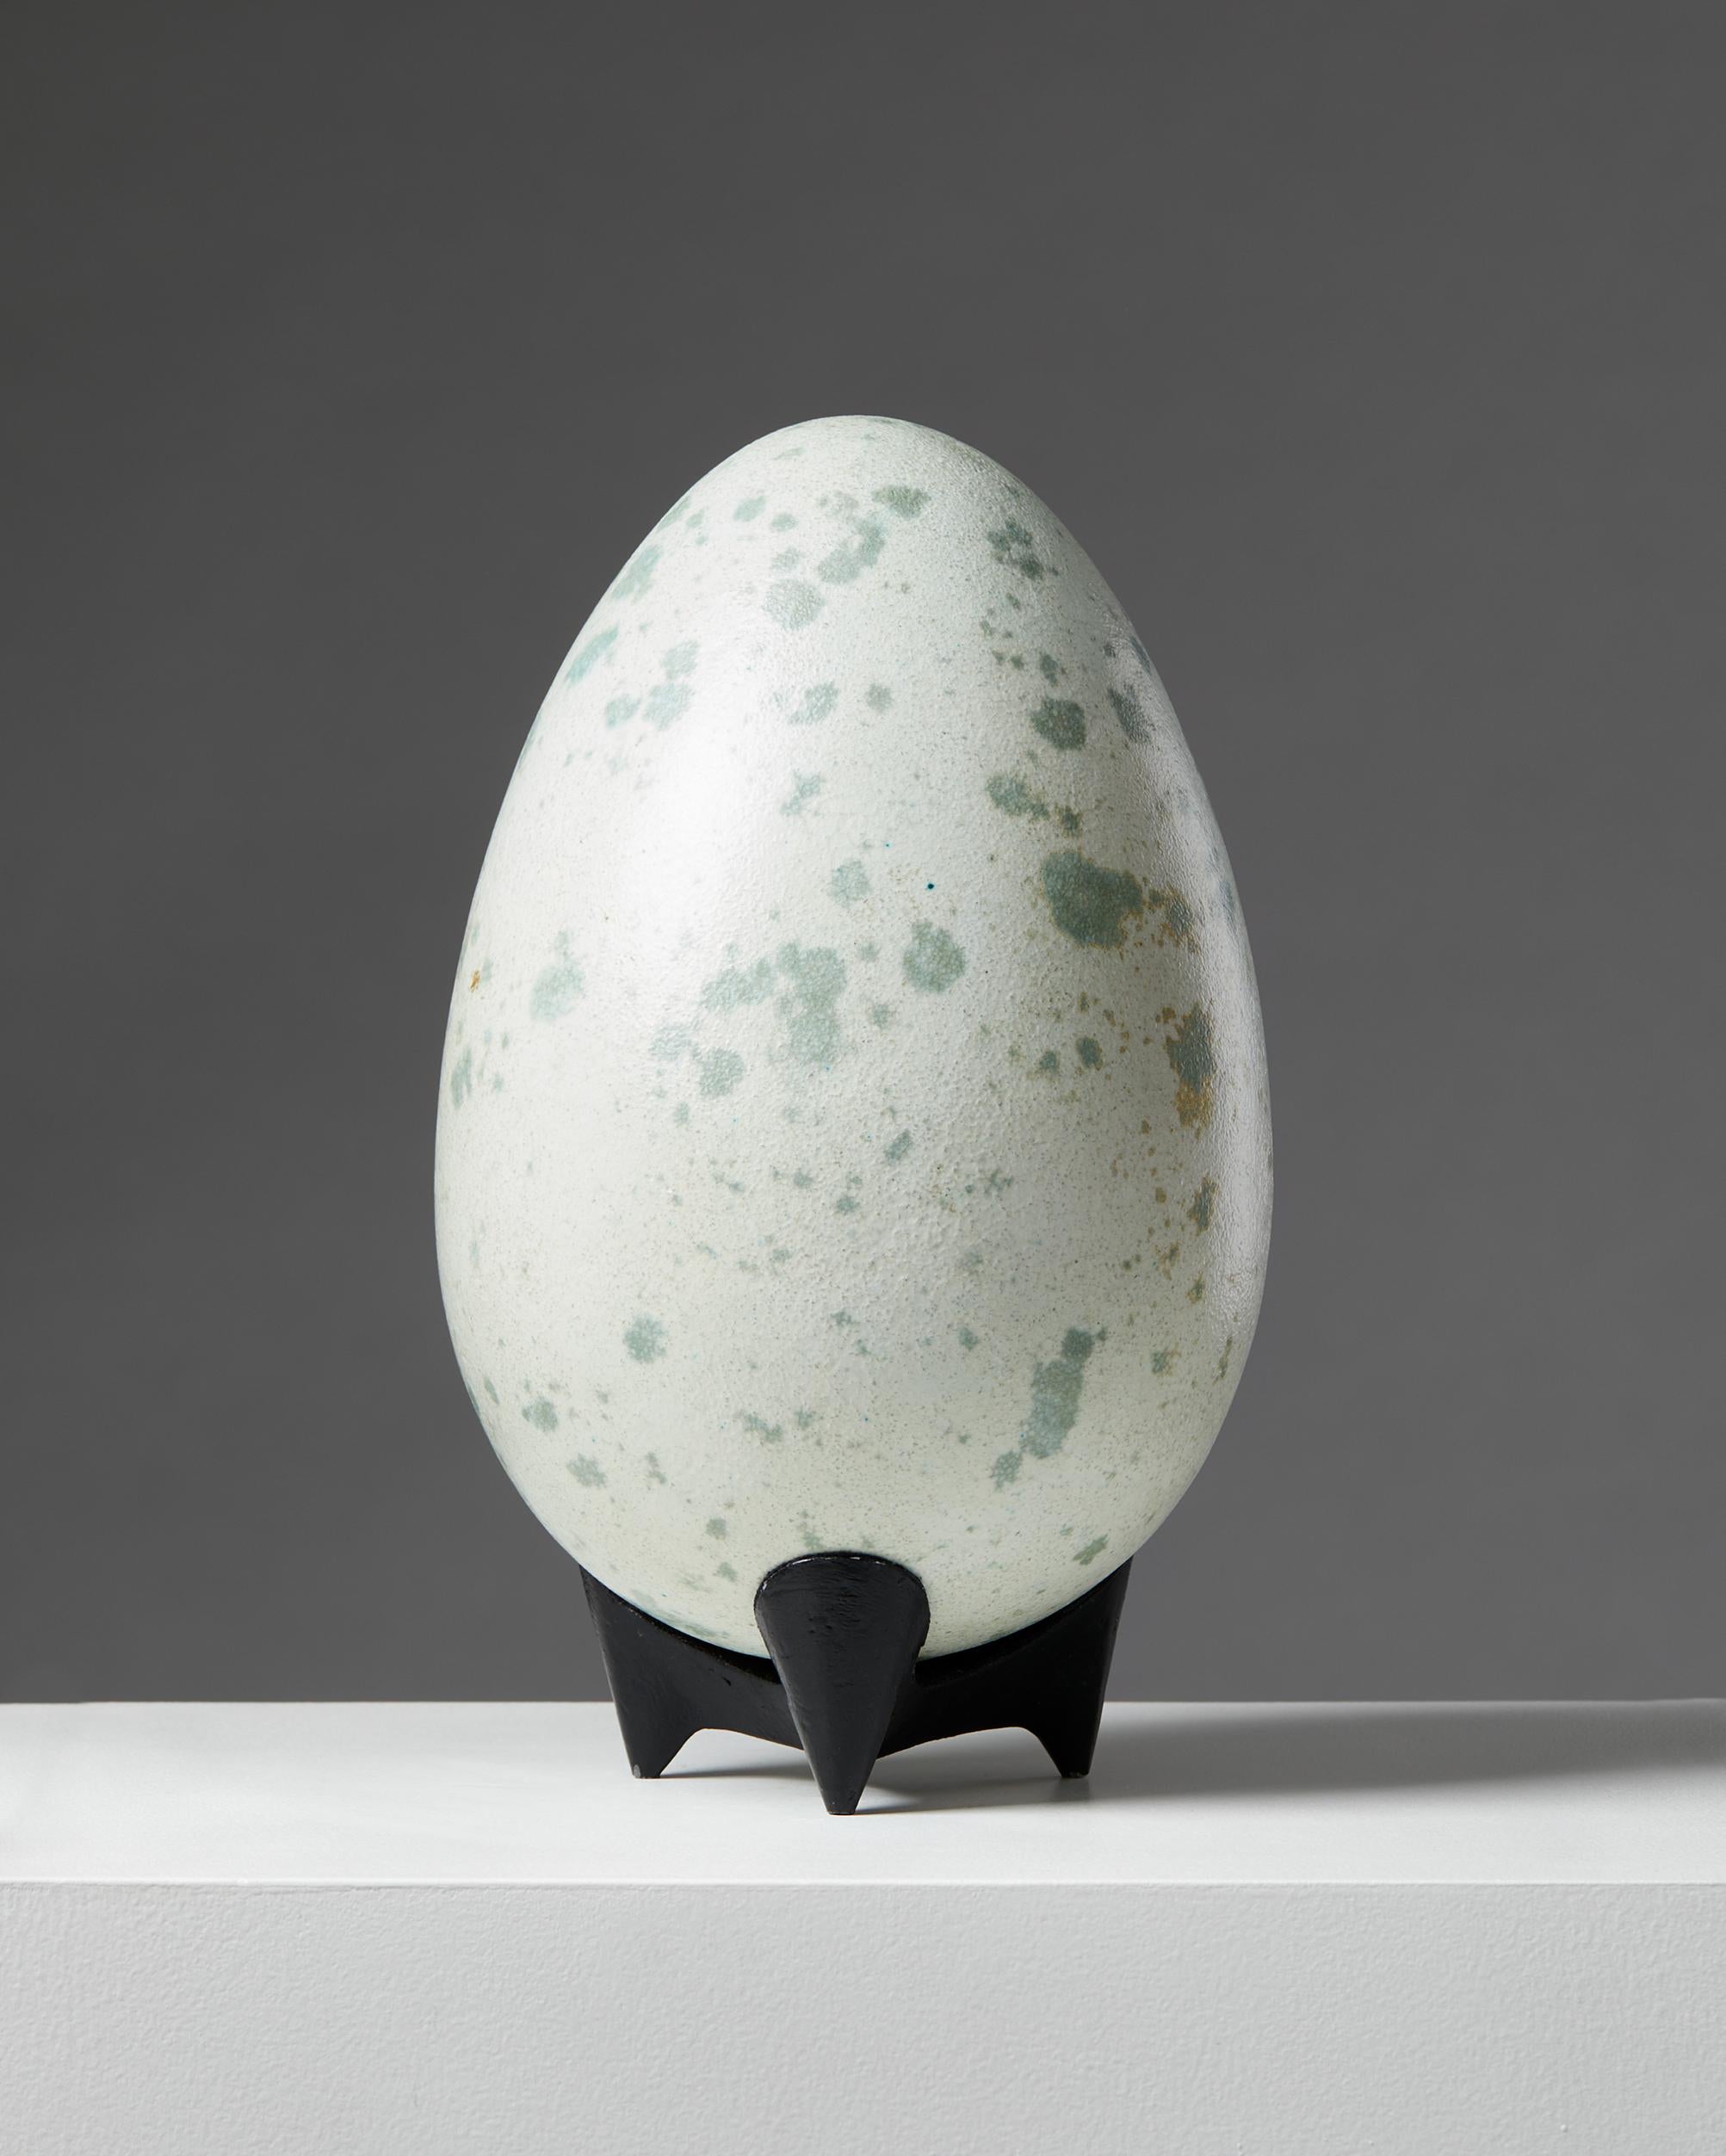 Mid-Century Modern Egg Sculpture Designed by Hans Hedberg made in Sweden during the 1980s / 1990s For Sale